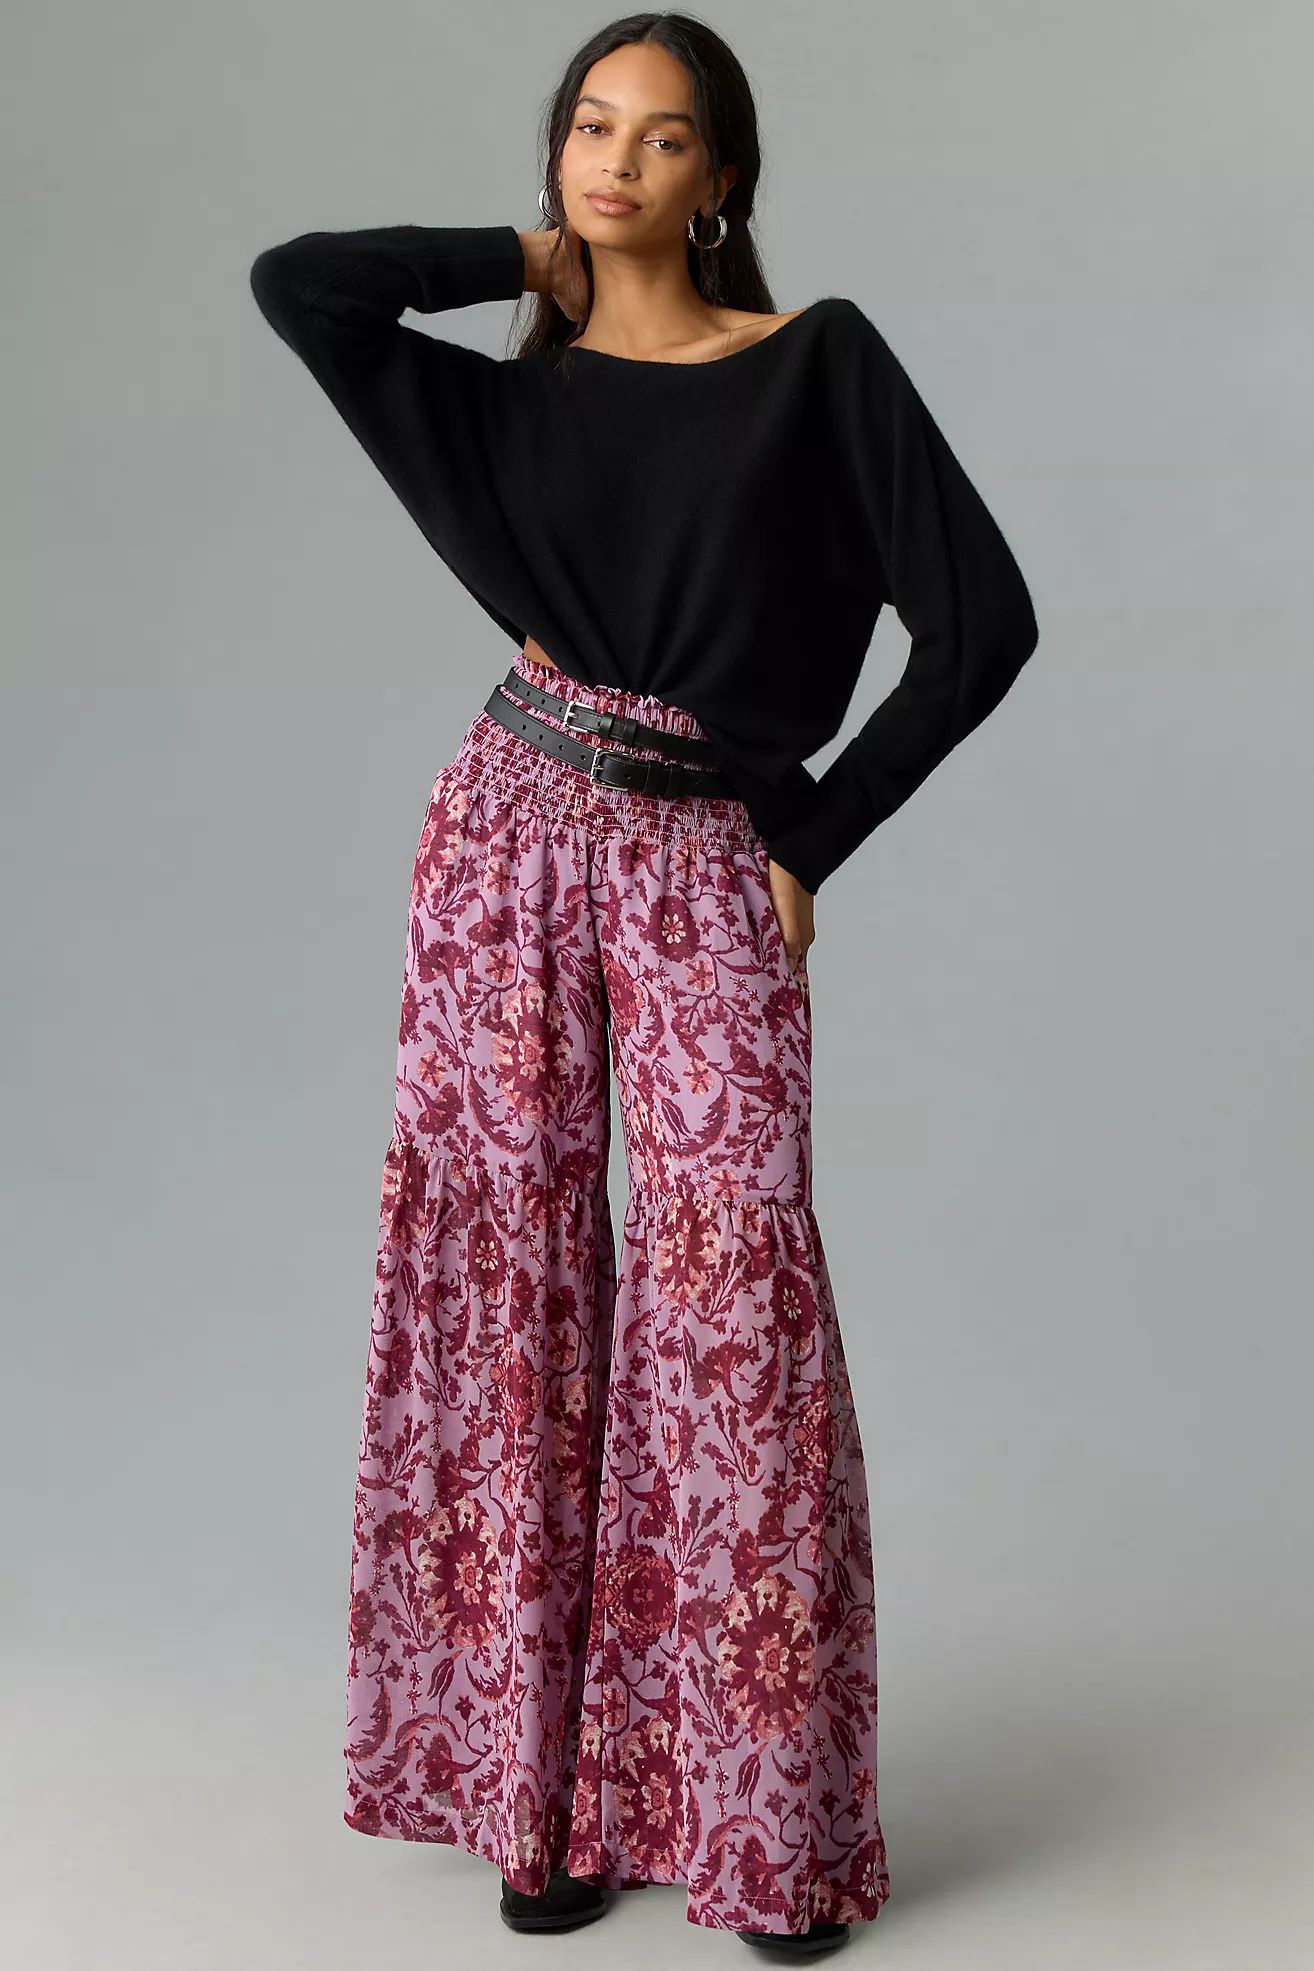 By Anthropologie Chiffon Tiered Wide-Leg Pants | Anthropologie (US)